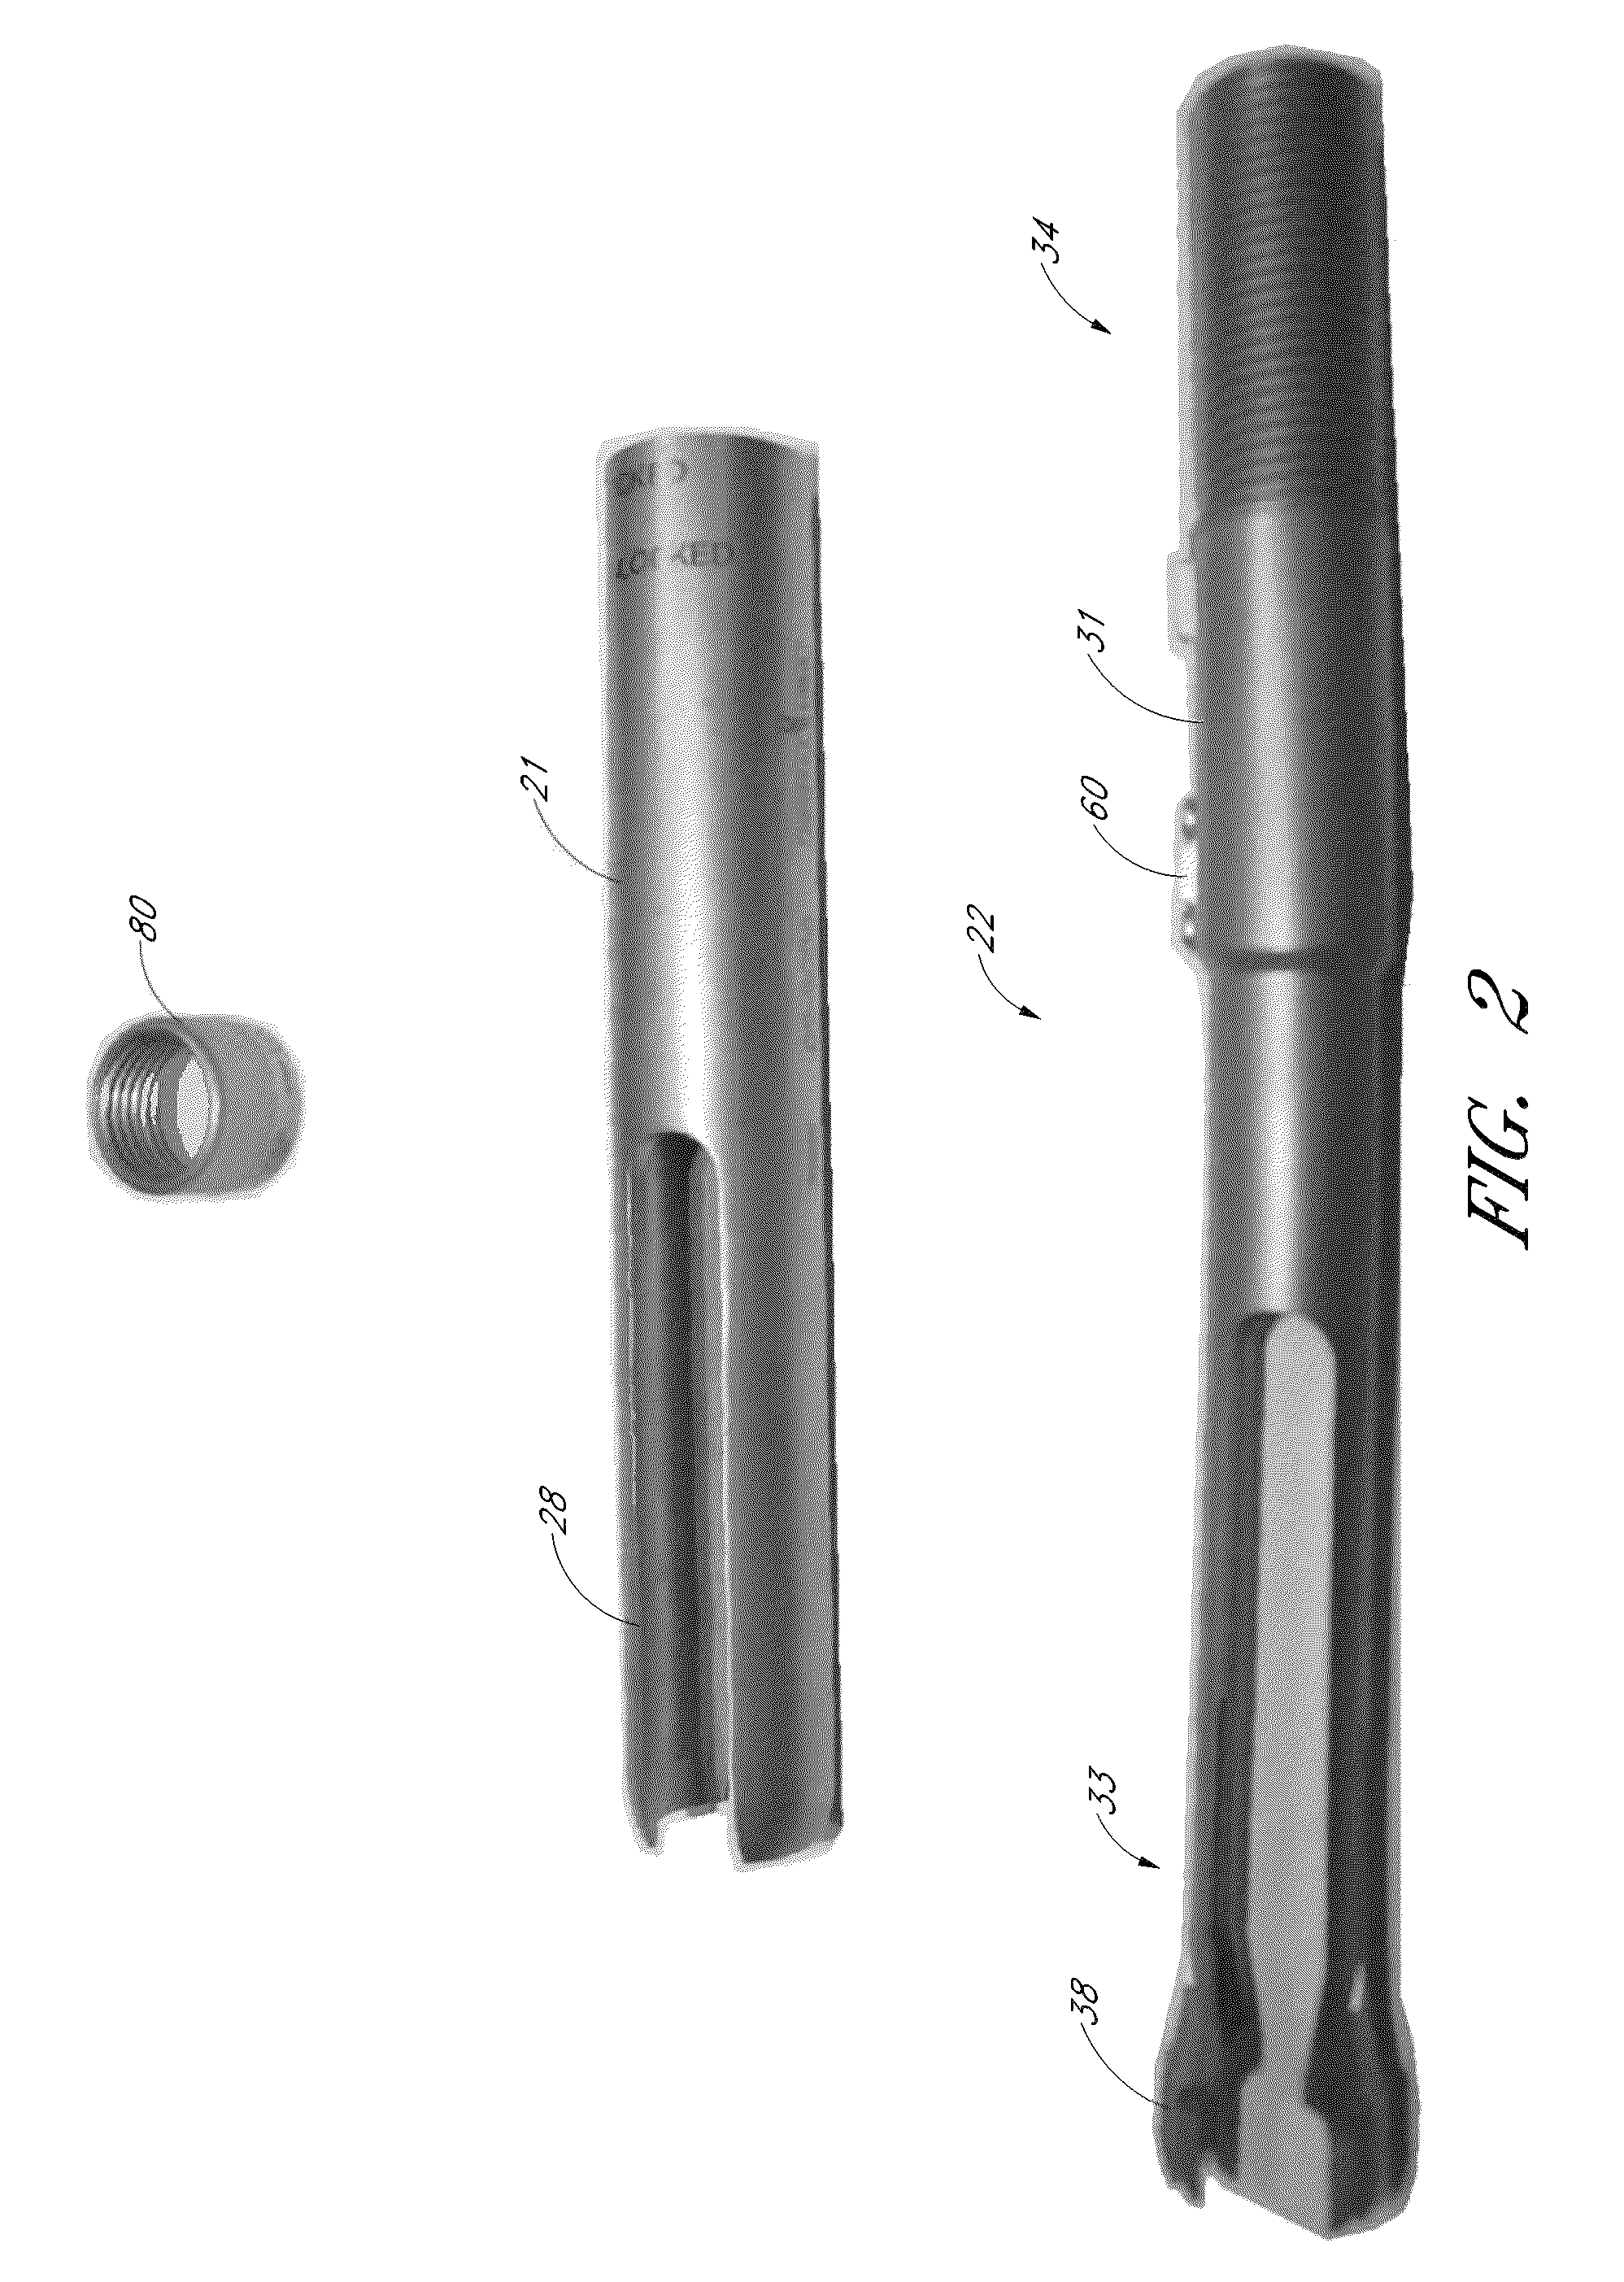 Minimally invasive surgical tower access devices and related methods